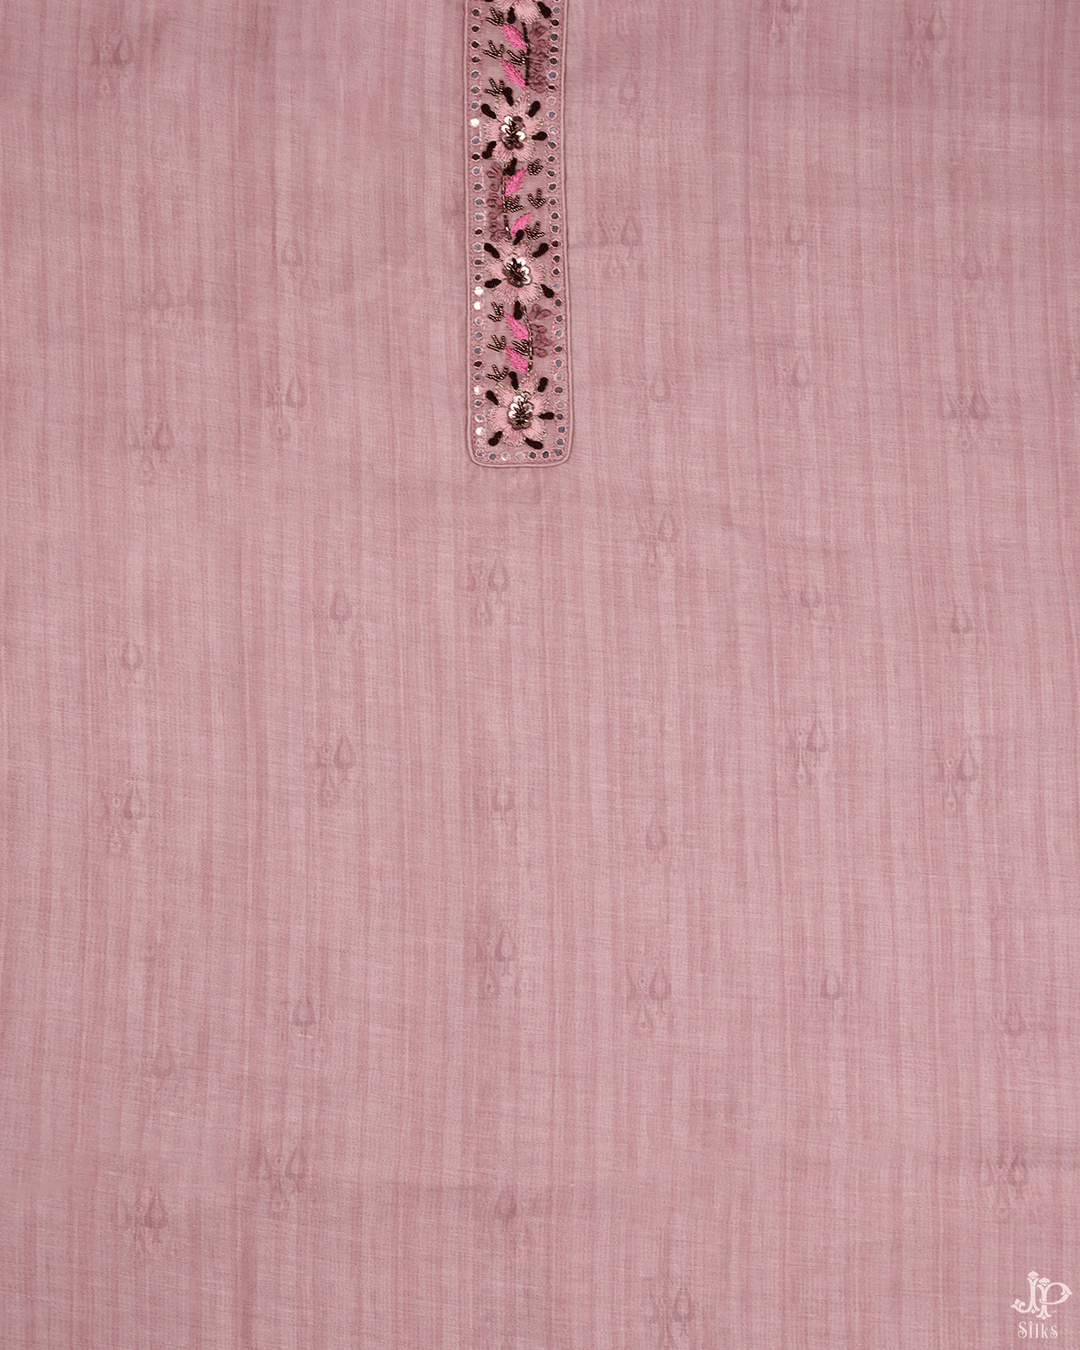 Onion Pink Unstitched Chudidhar Material - D5209 - View 3